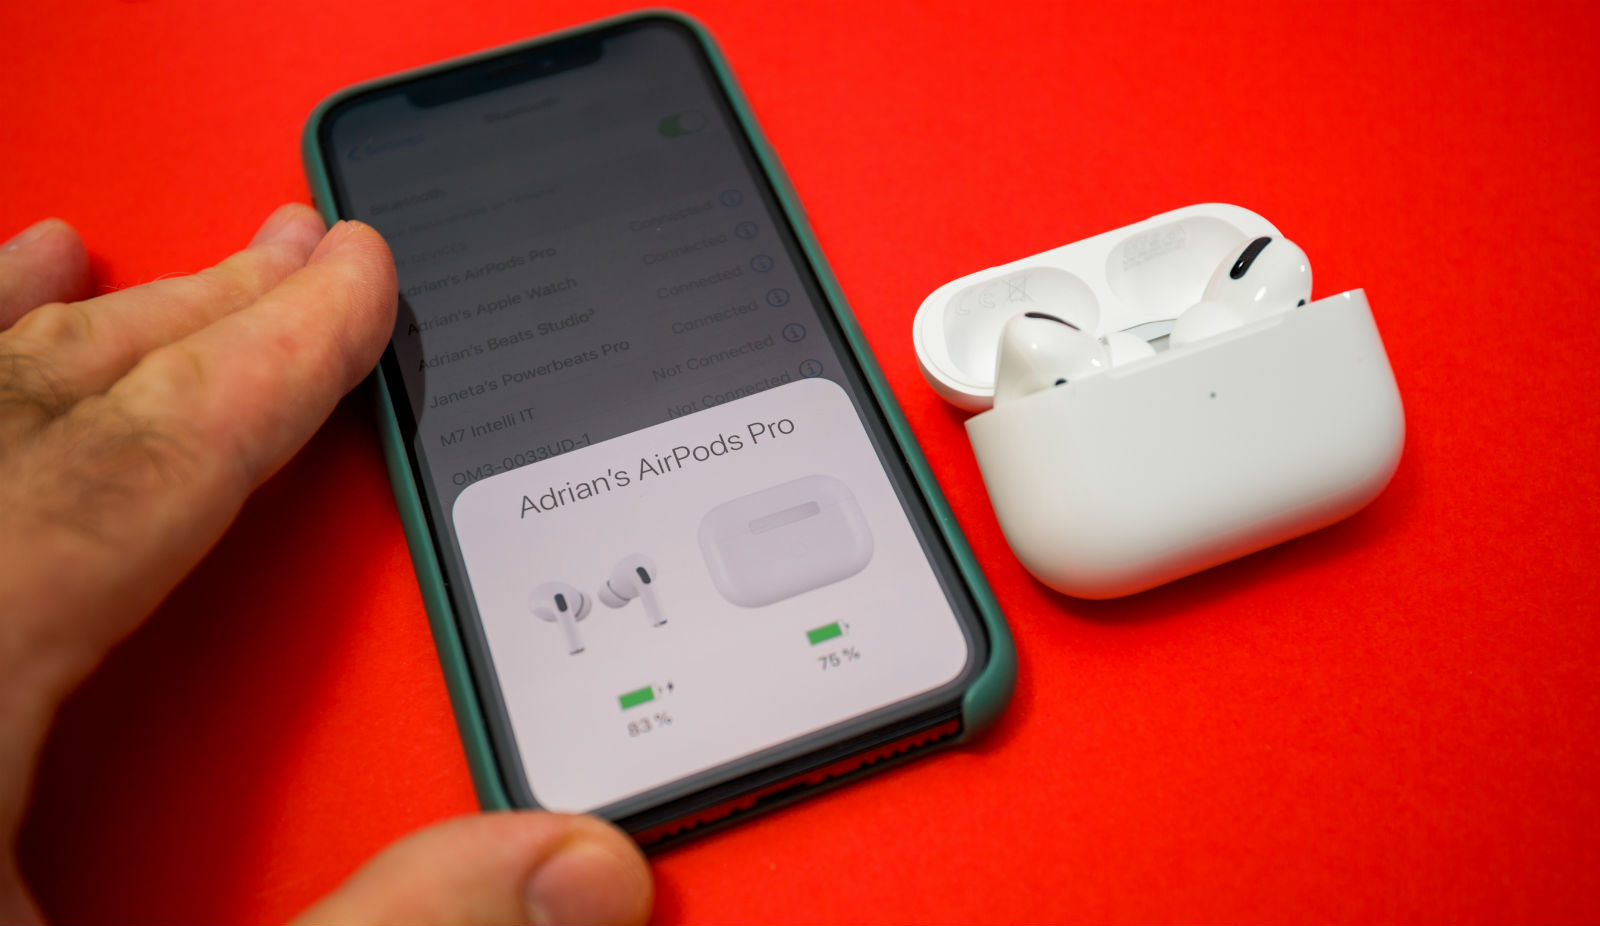 stewardesse råb op mikrocomputer How to Connect Airpods Pro to MacBook or iPhone? - ESR Blog